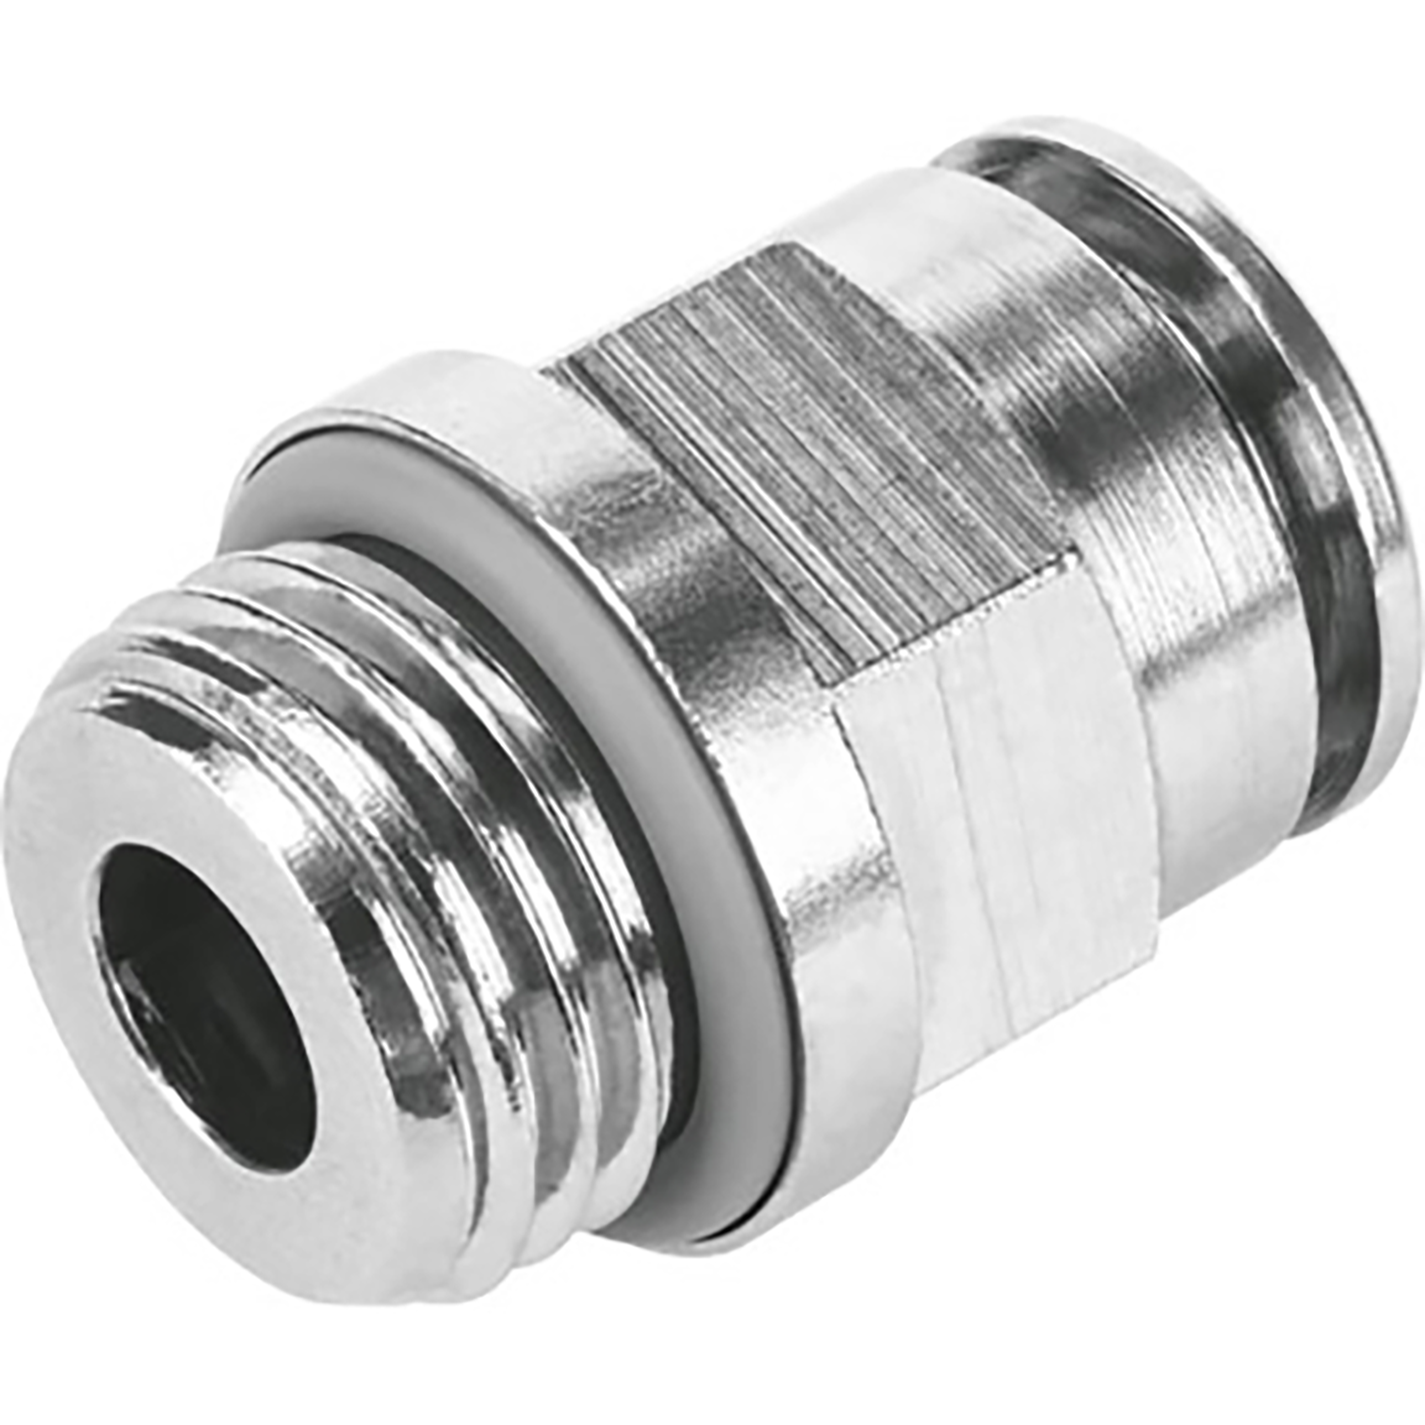 NPQH-D-G14-Q8-P10 PUSH IN FITTINGS sold in multiples of 10 only